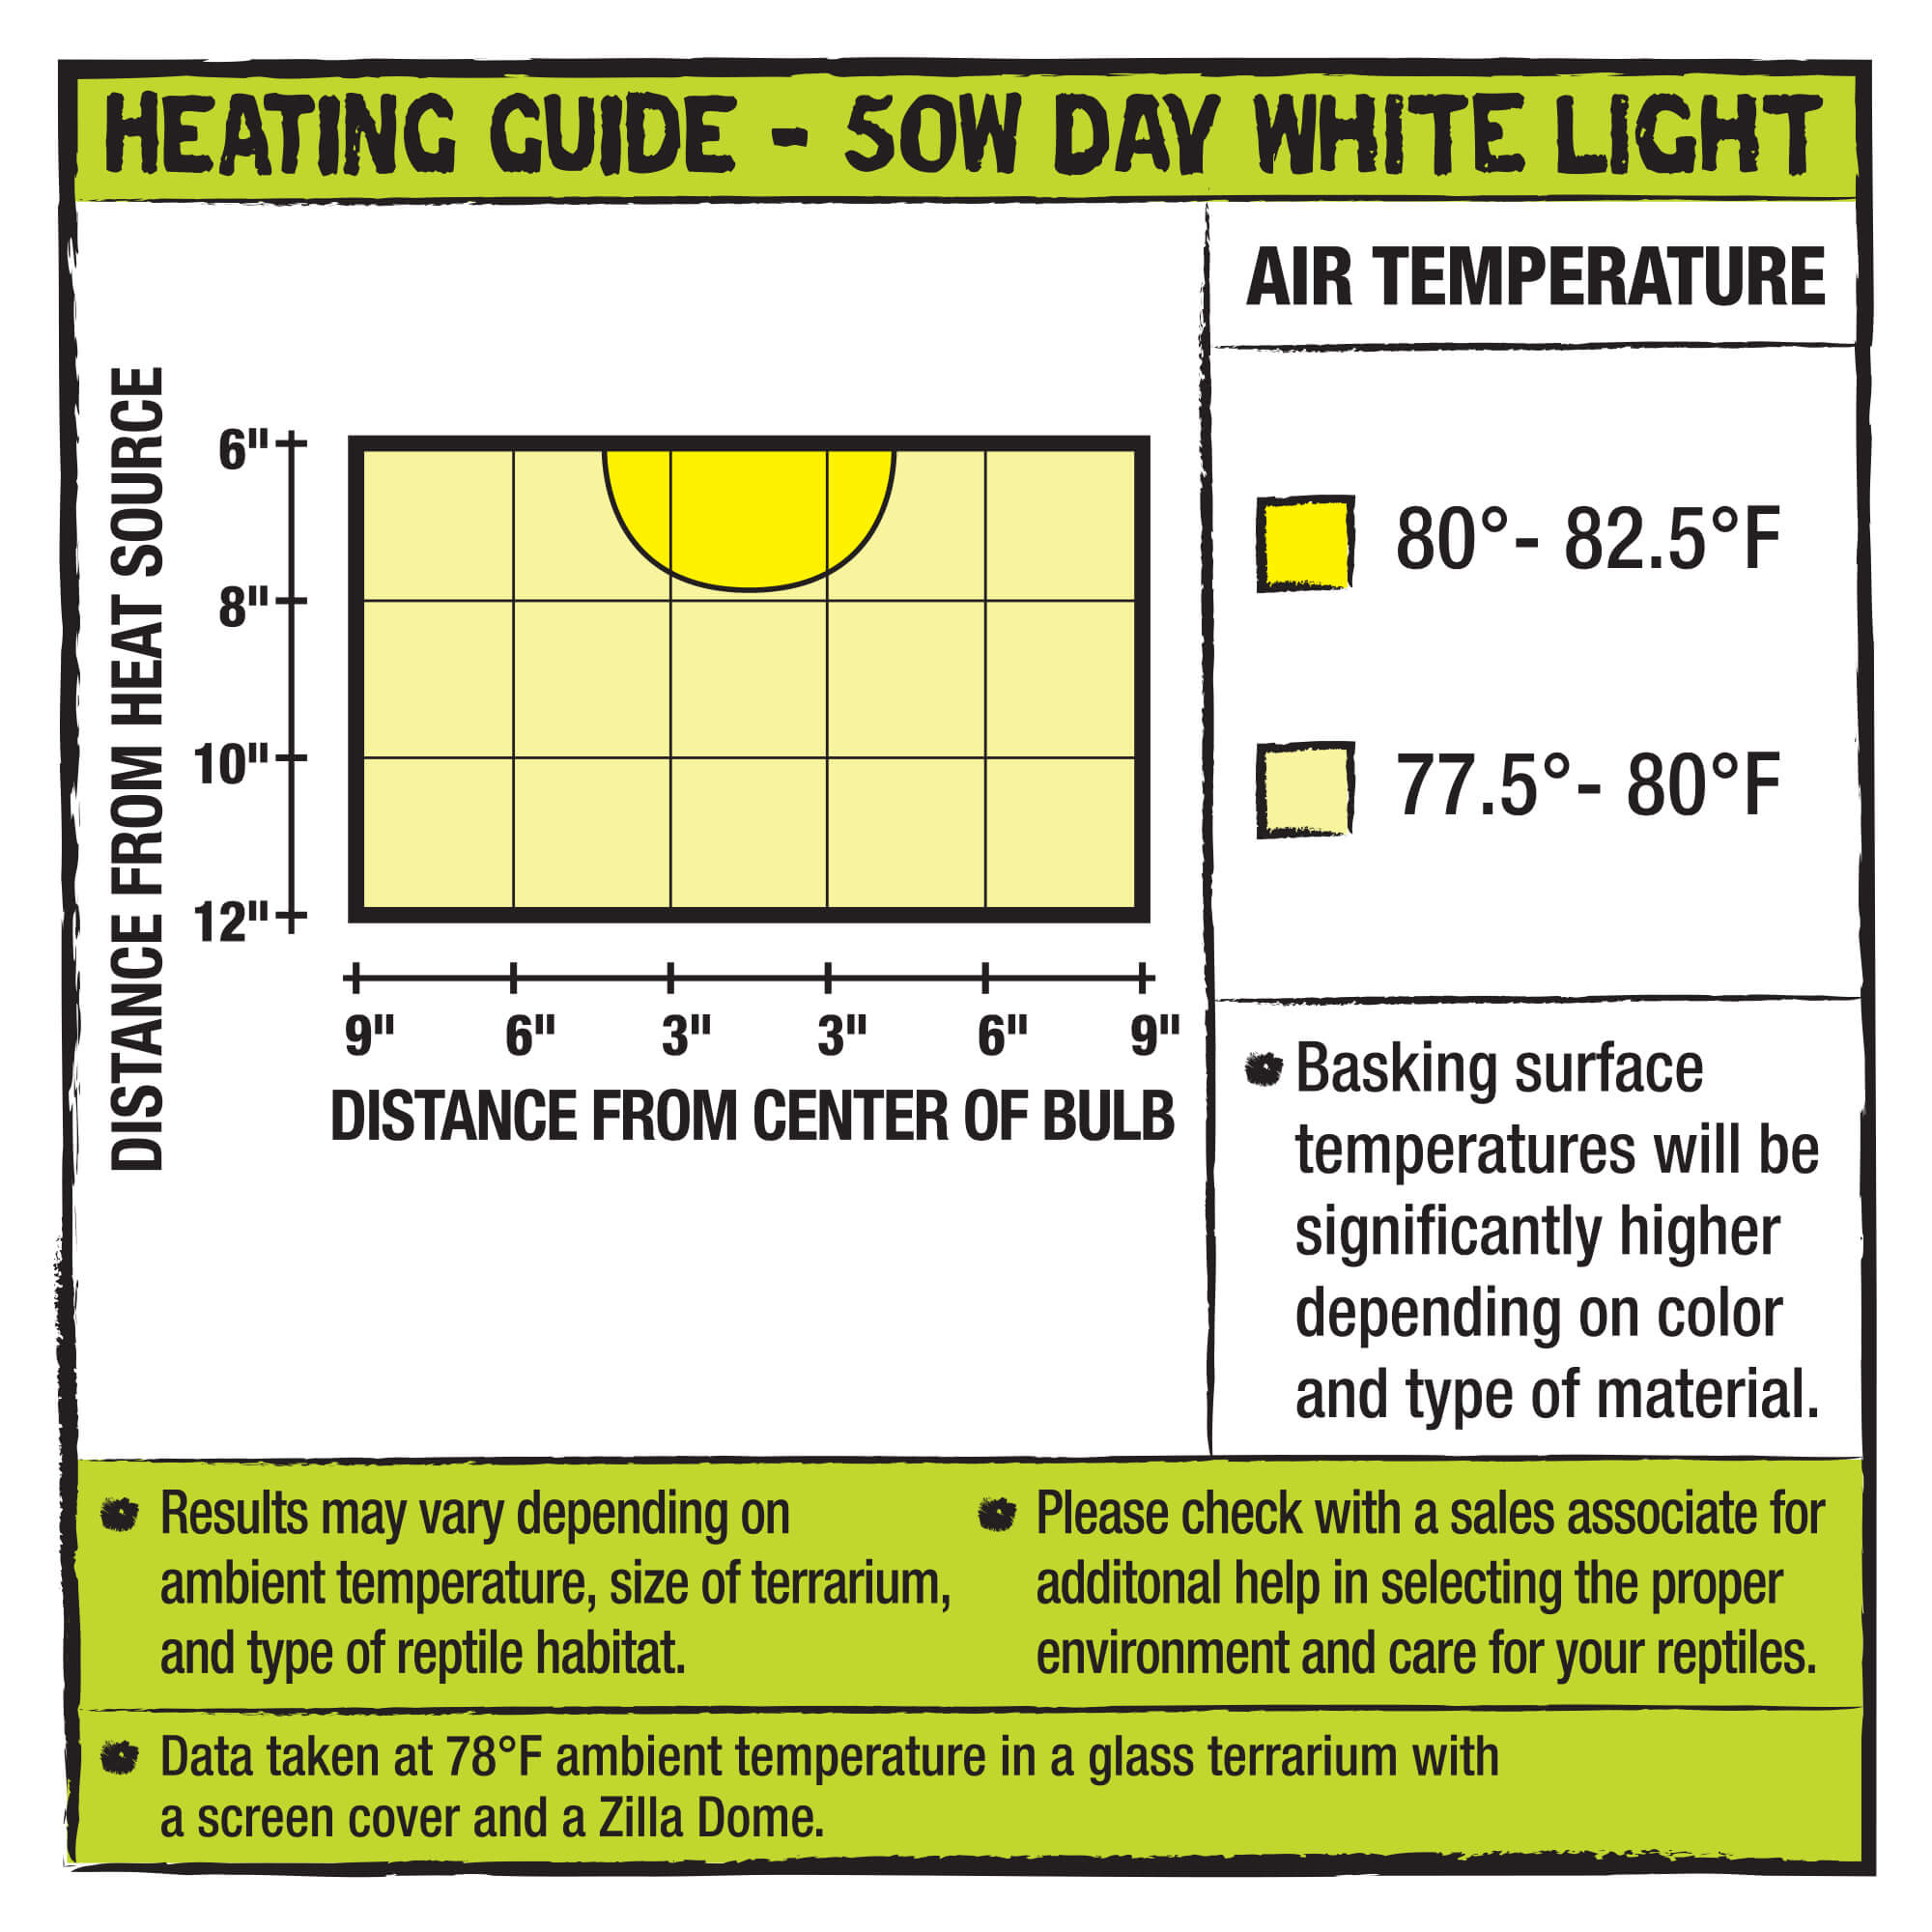 Incandescent Bulb heating guide